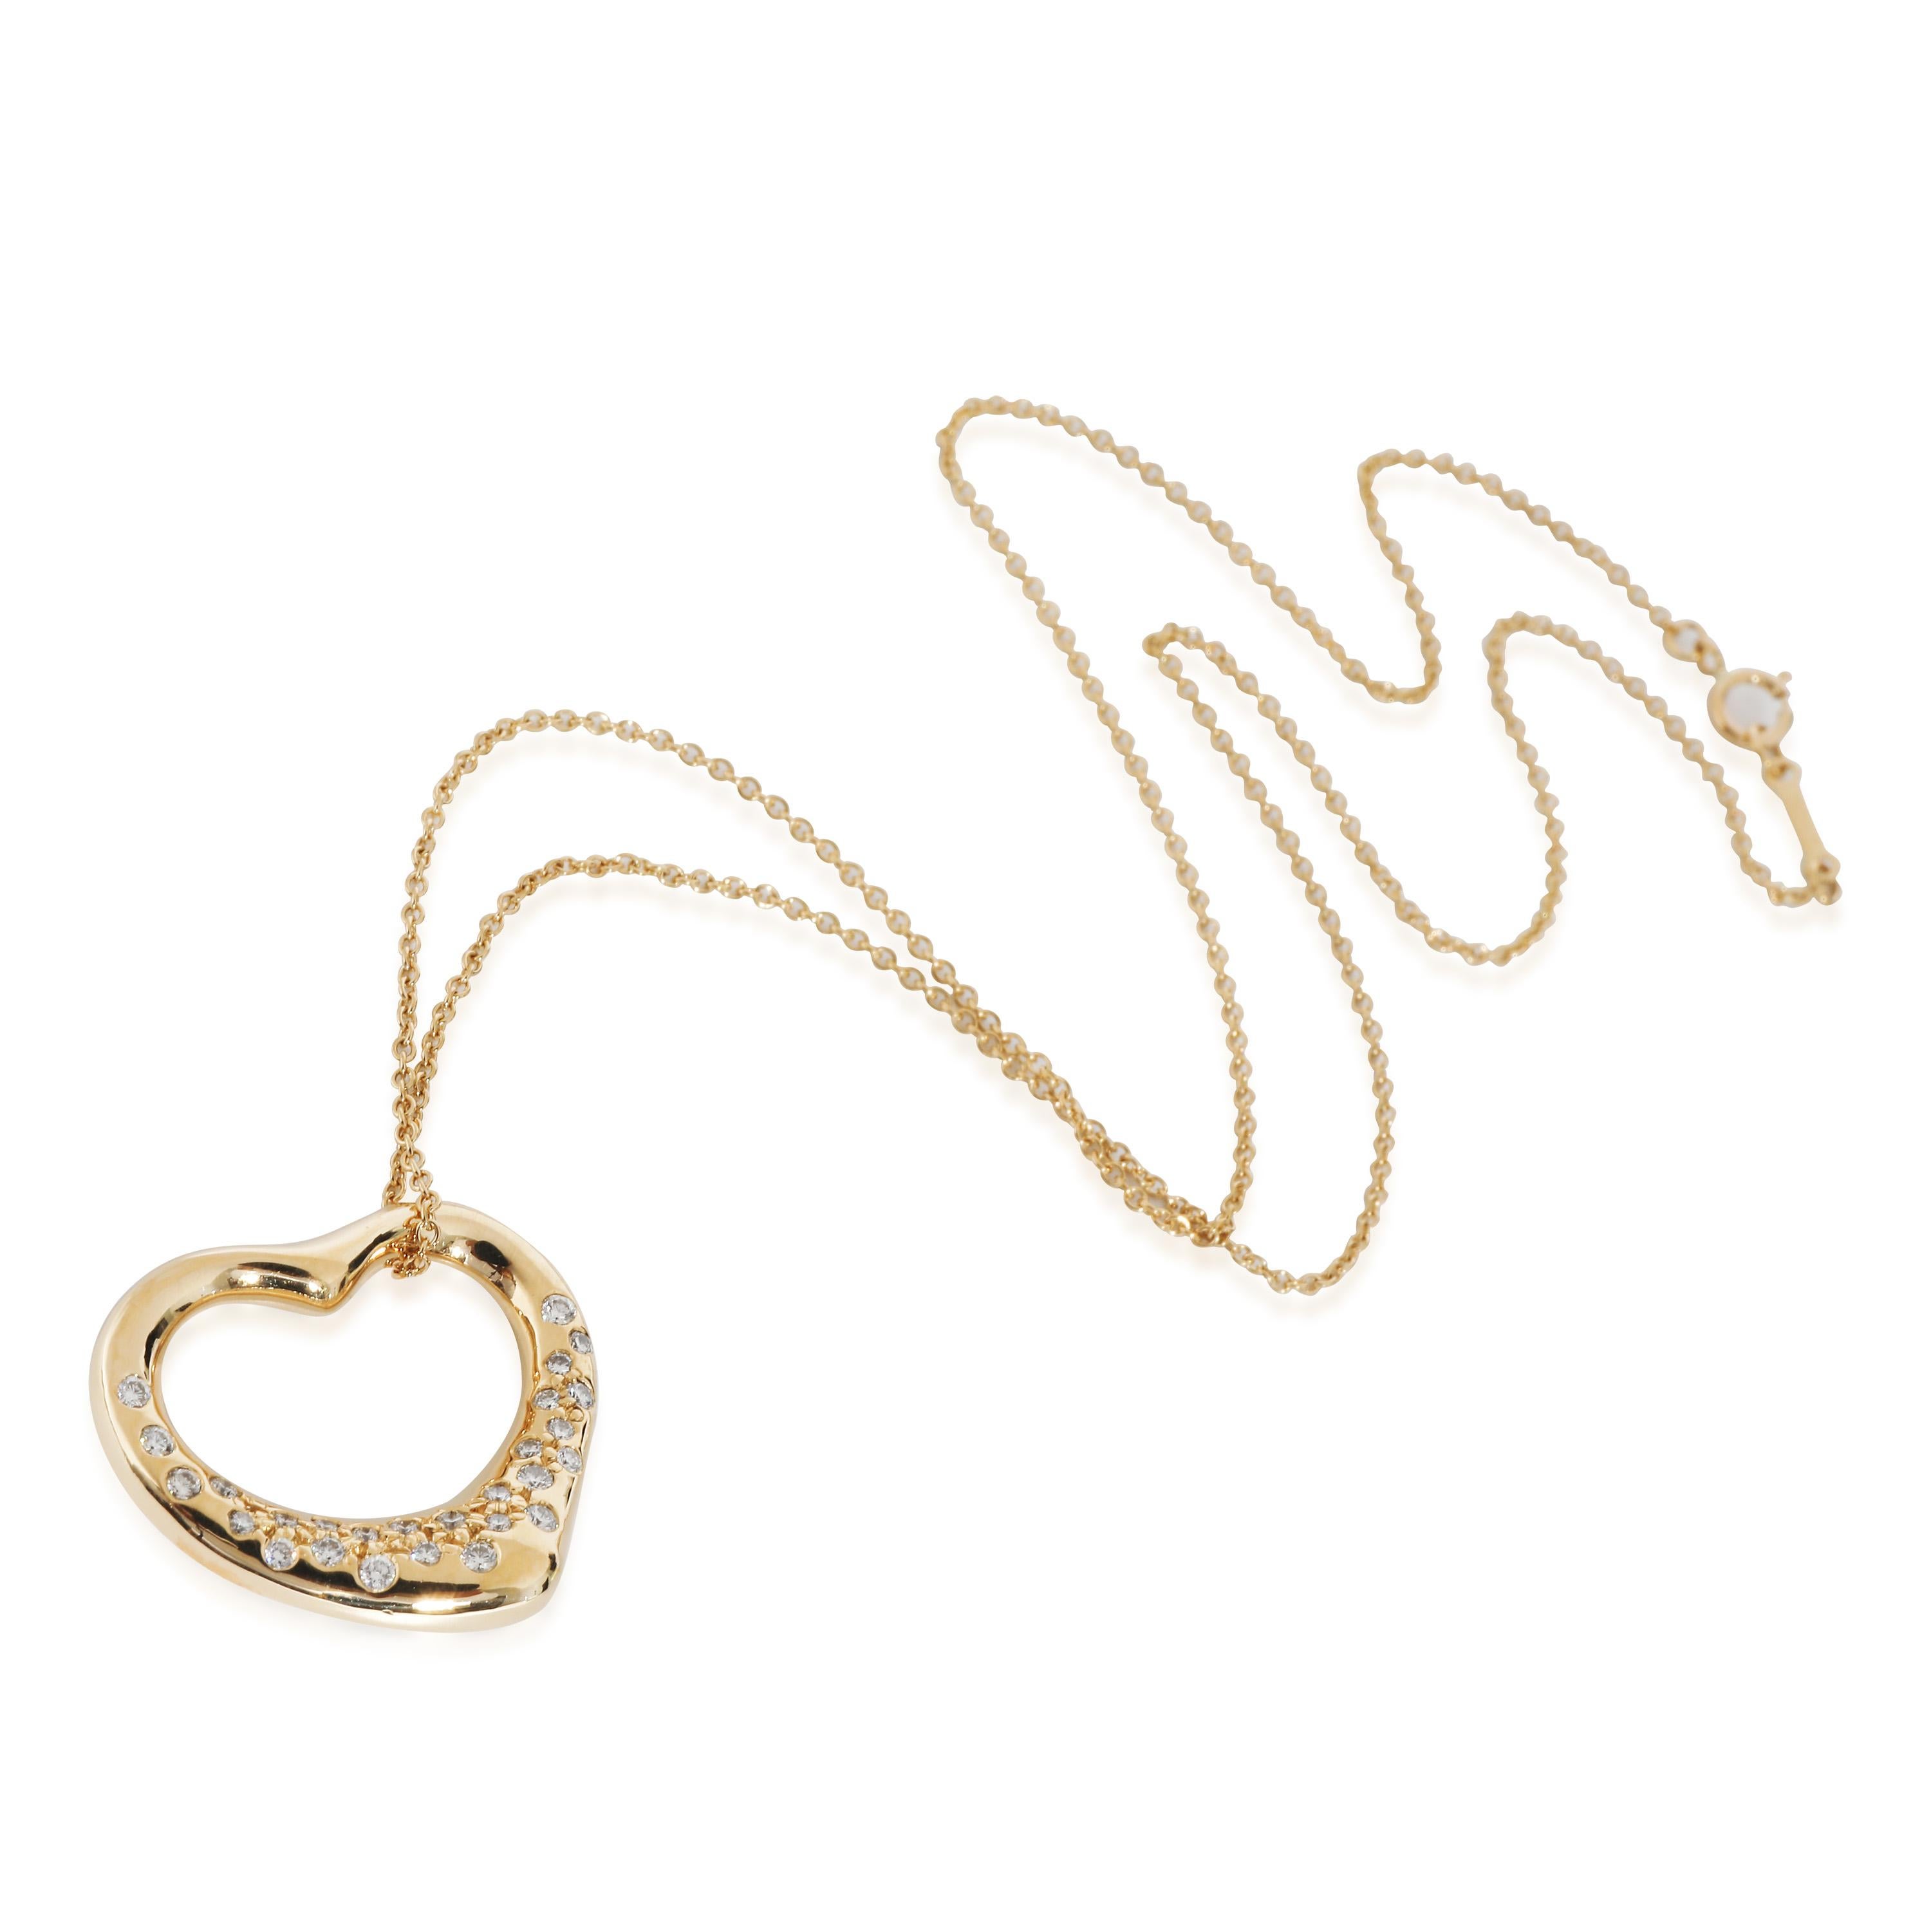 Tiffany & Co. Elsa Peretti Open Heart Pendant in 18k Yellow Gold 0.8 CTW In Excellent Condition For Sale In New York, NY